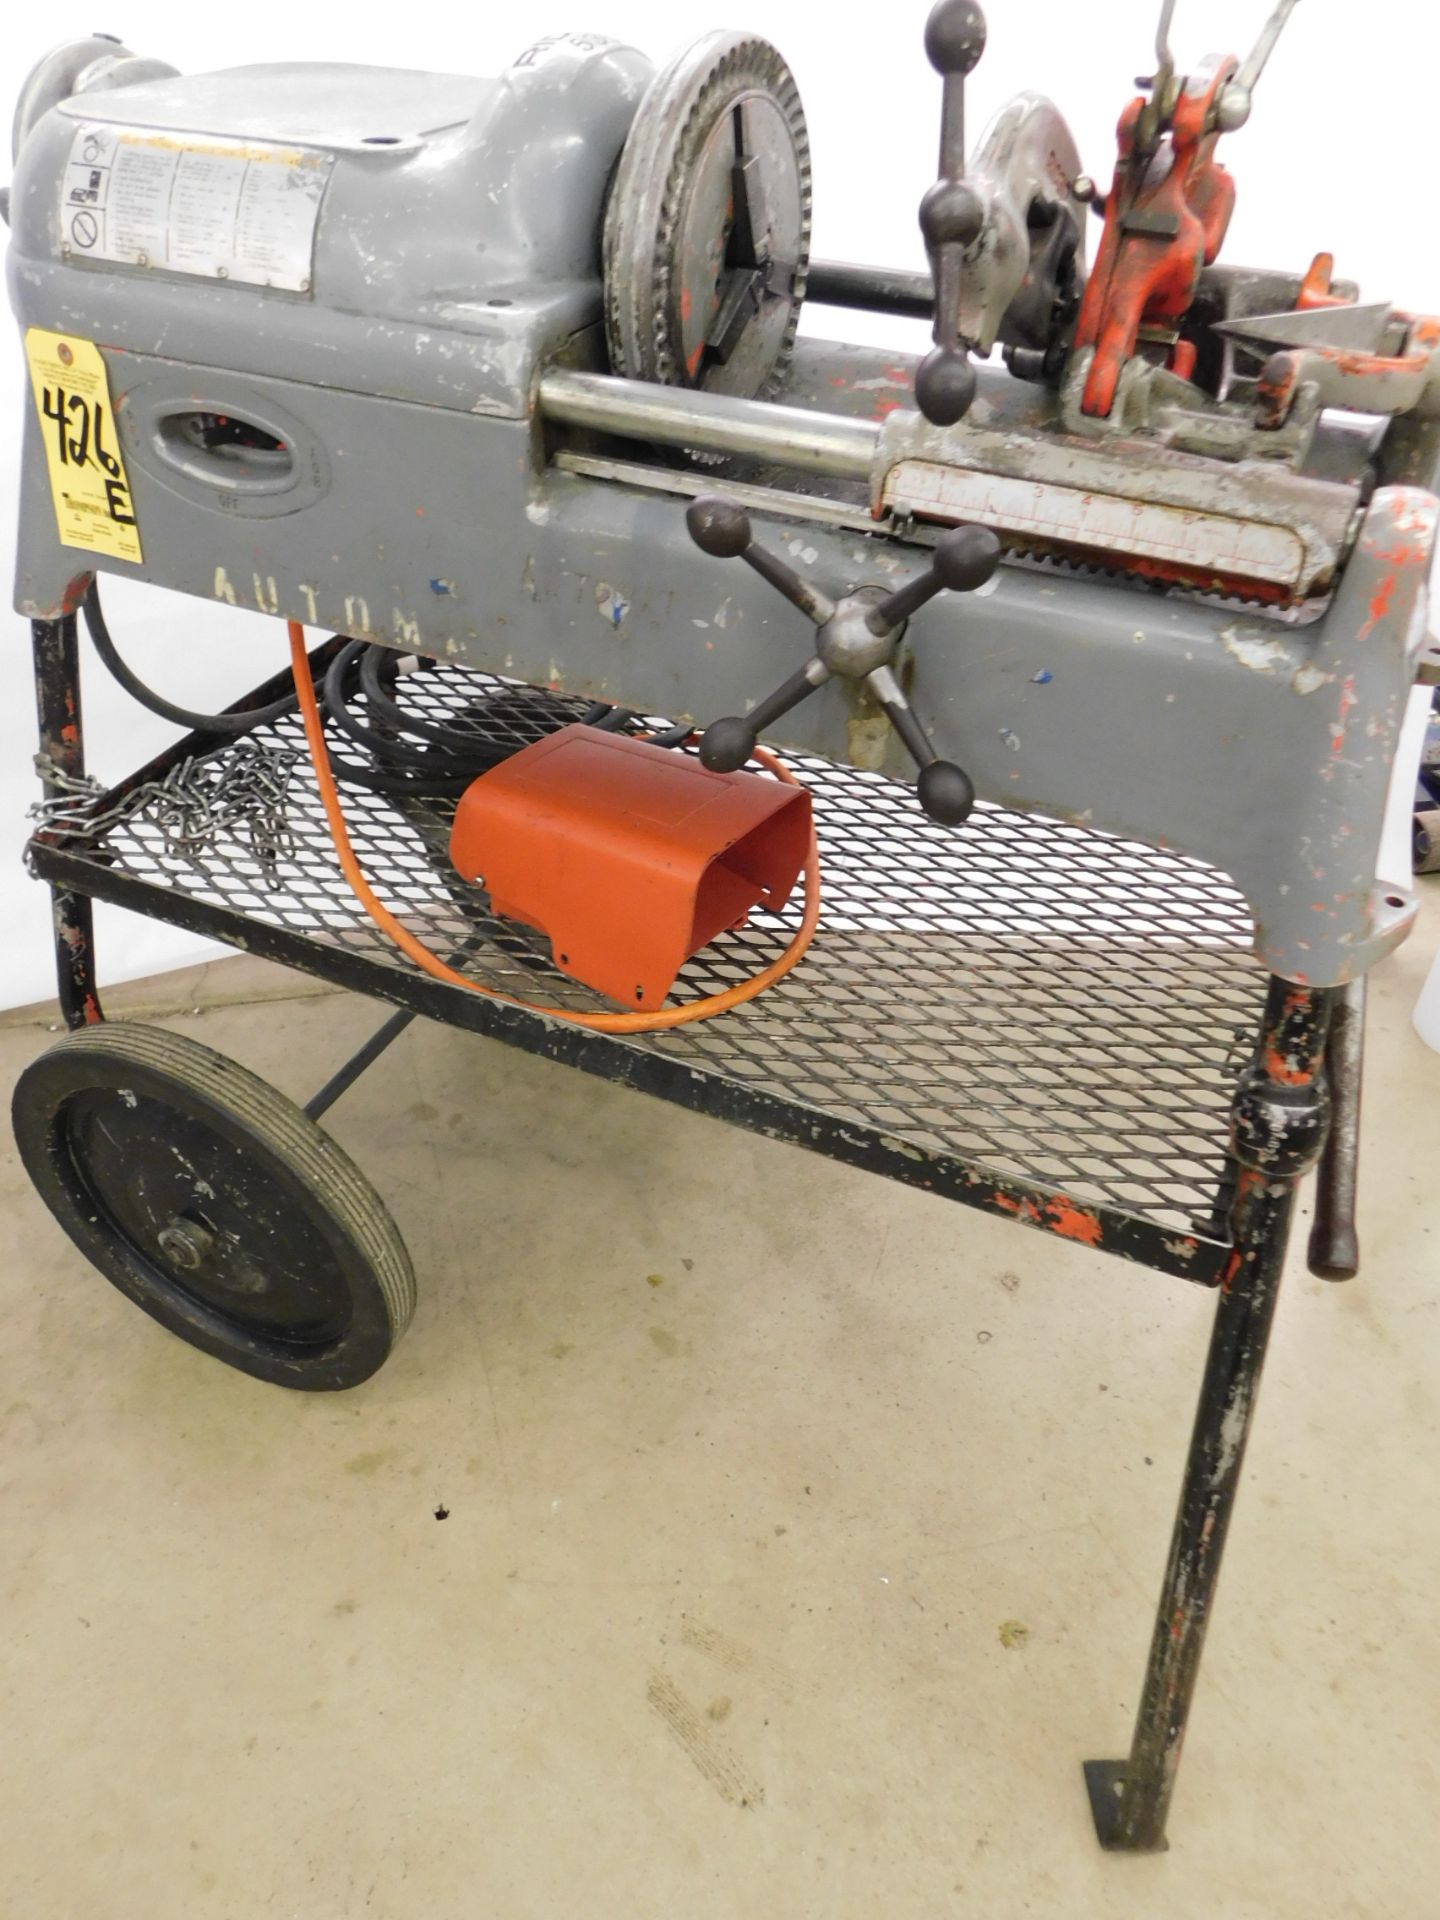 Ridgid Model 535 Pipe Threader, SN EC0 3267, with Die Head, Pipe Cut-Off, Reamer, and Foot Pedal - Image 6 of 12